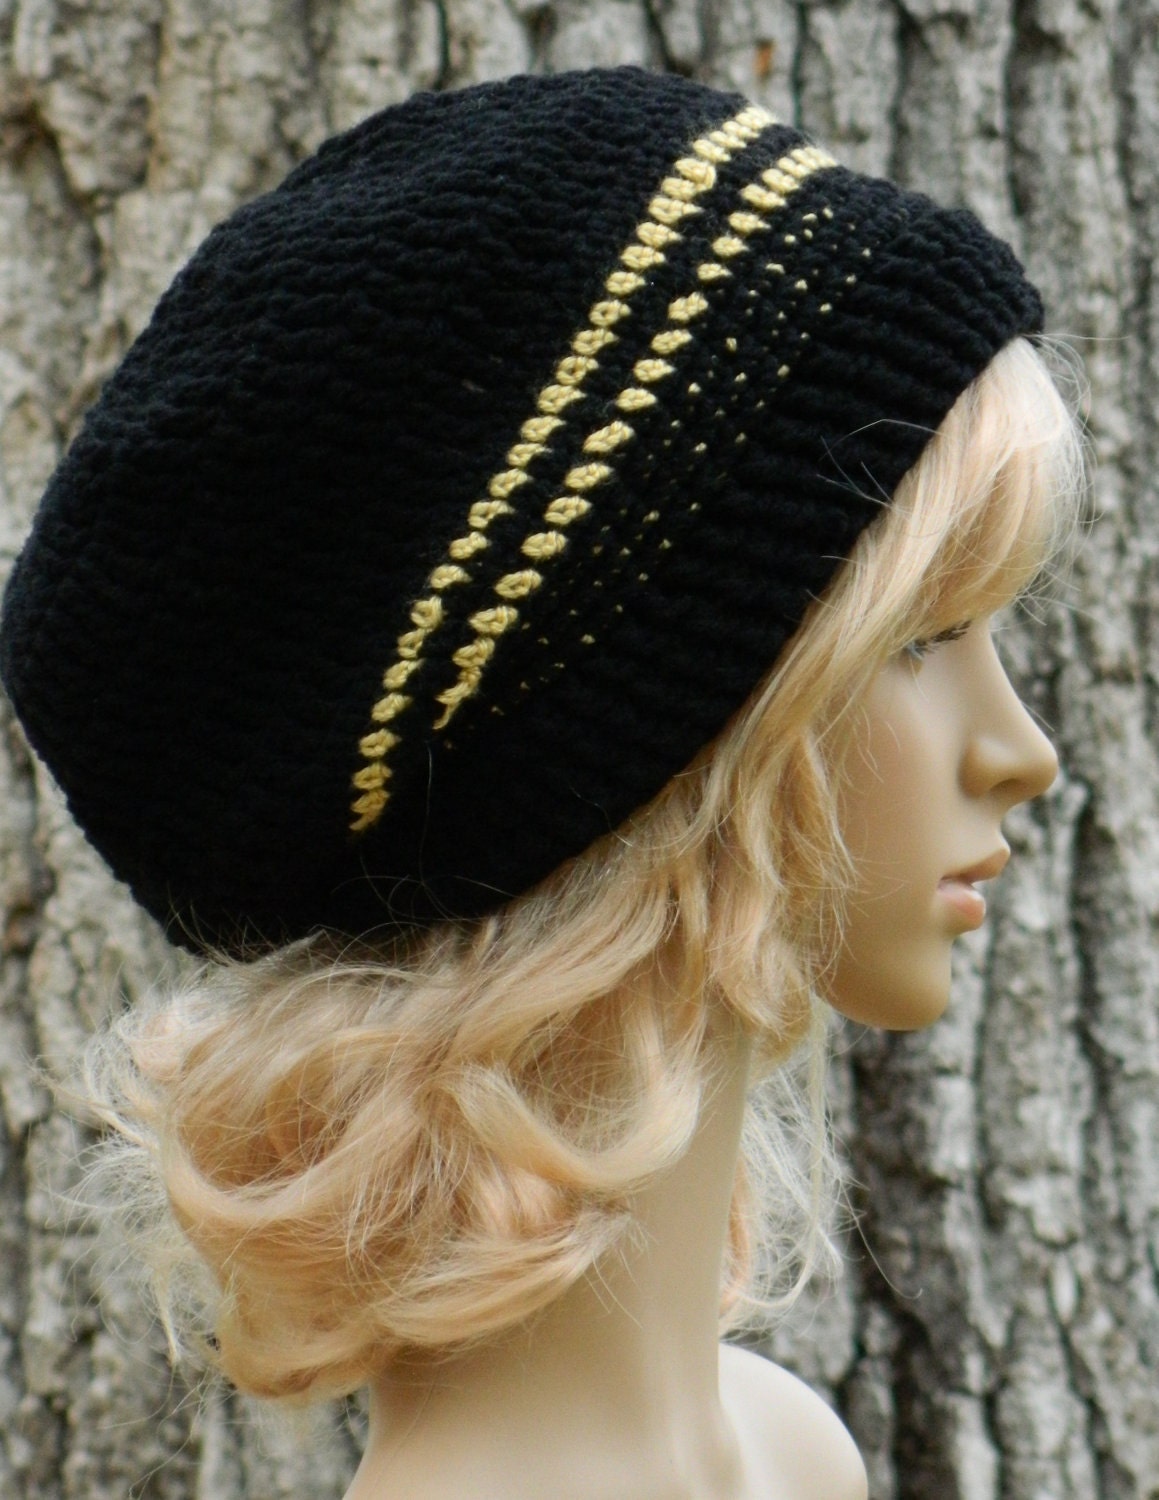 Winter Slouchy Beanie Boho For Women Men Teens In Black and Metalic Gold